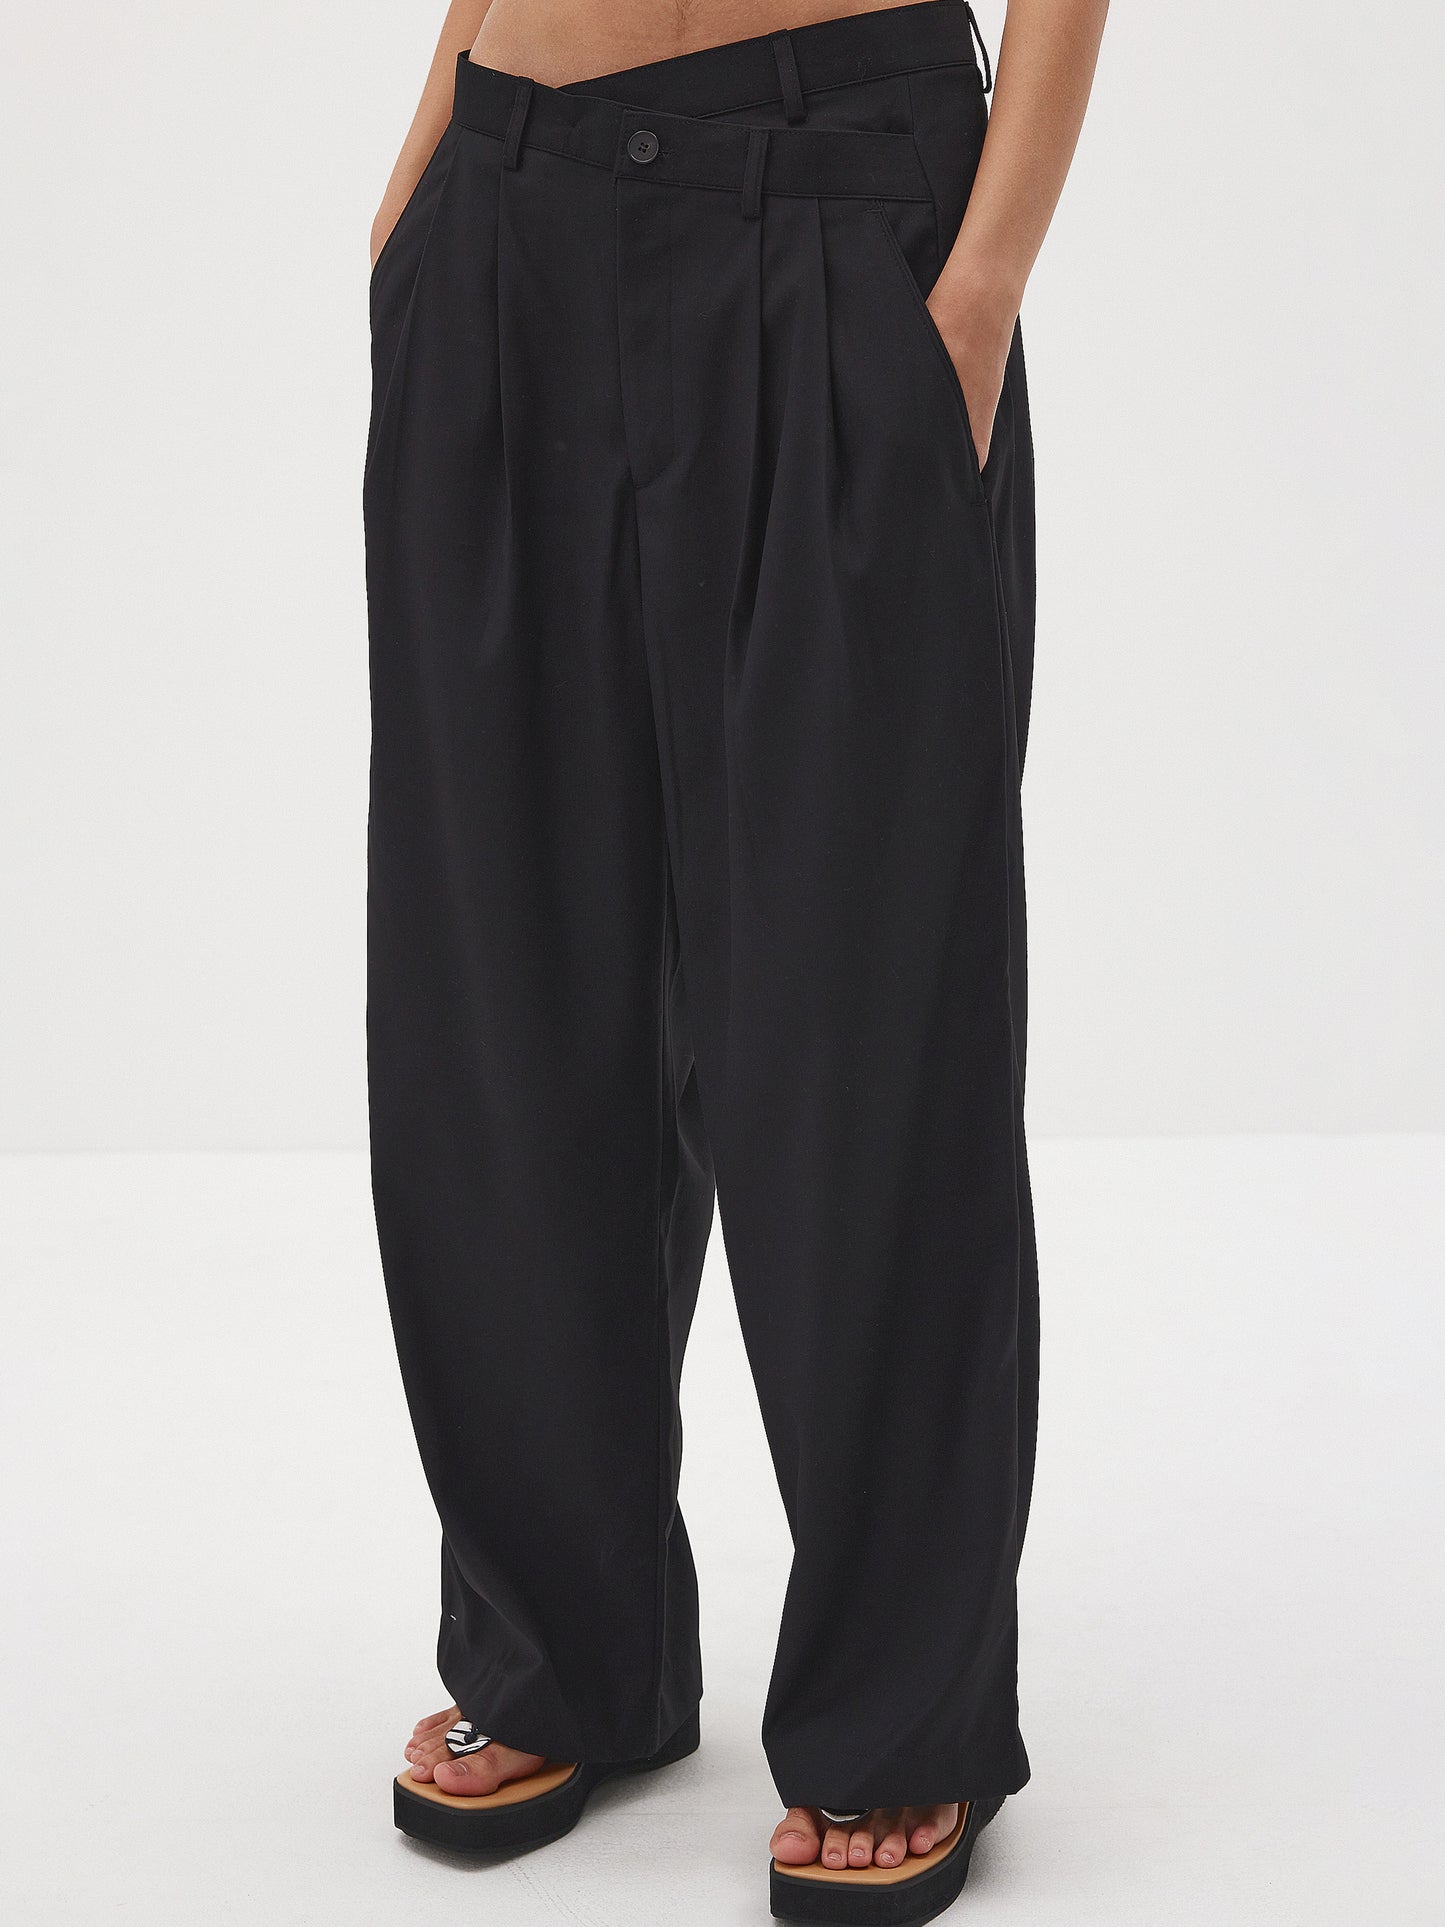 Low Rise Criss Cross Suit Trousers, Black – SourceUnknown